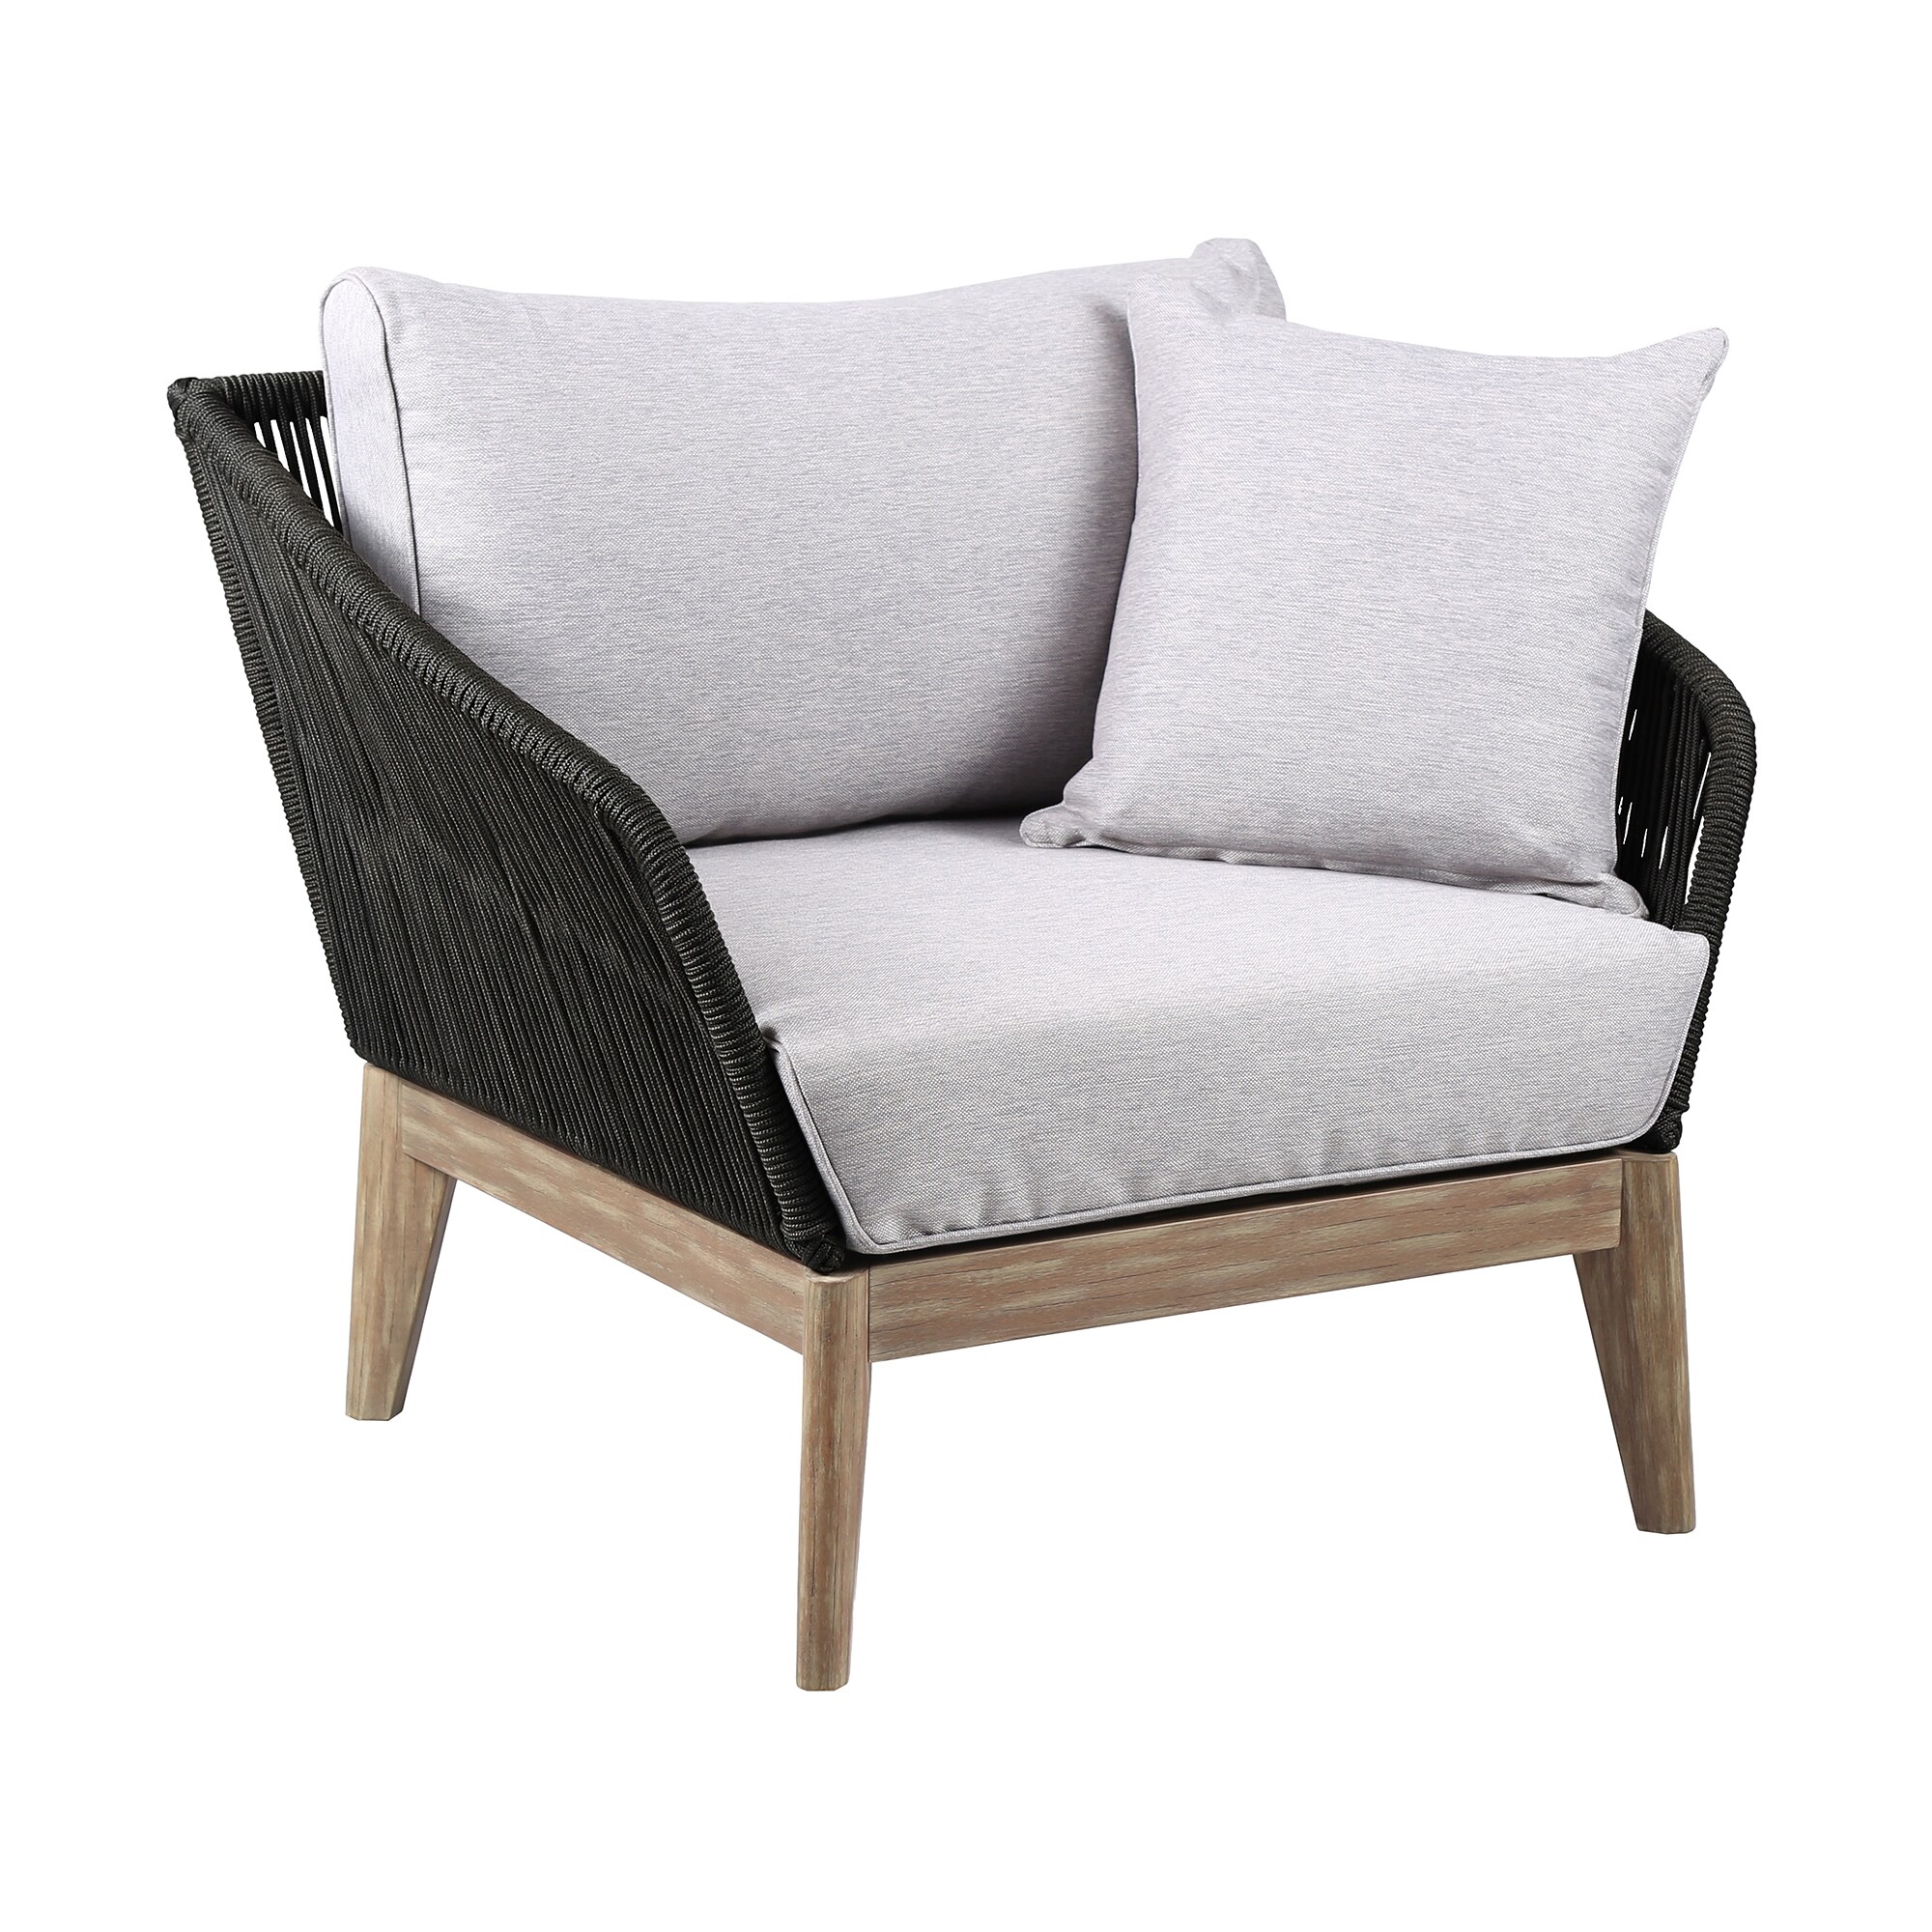 Athos Indoor Outdoor Club Chair In Eucalyptus Wood With Rope And Grey Cushions